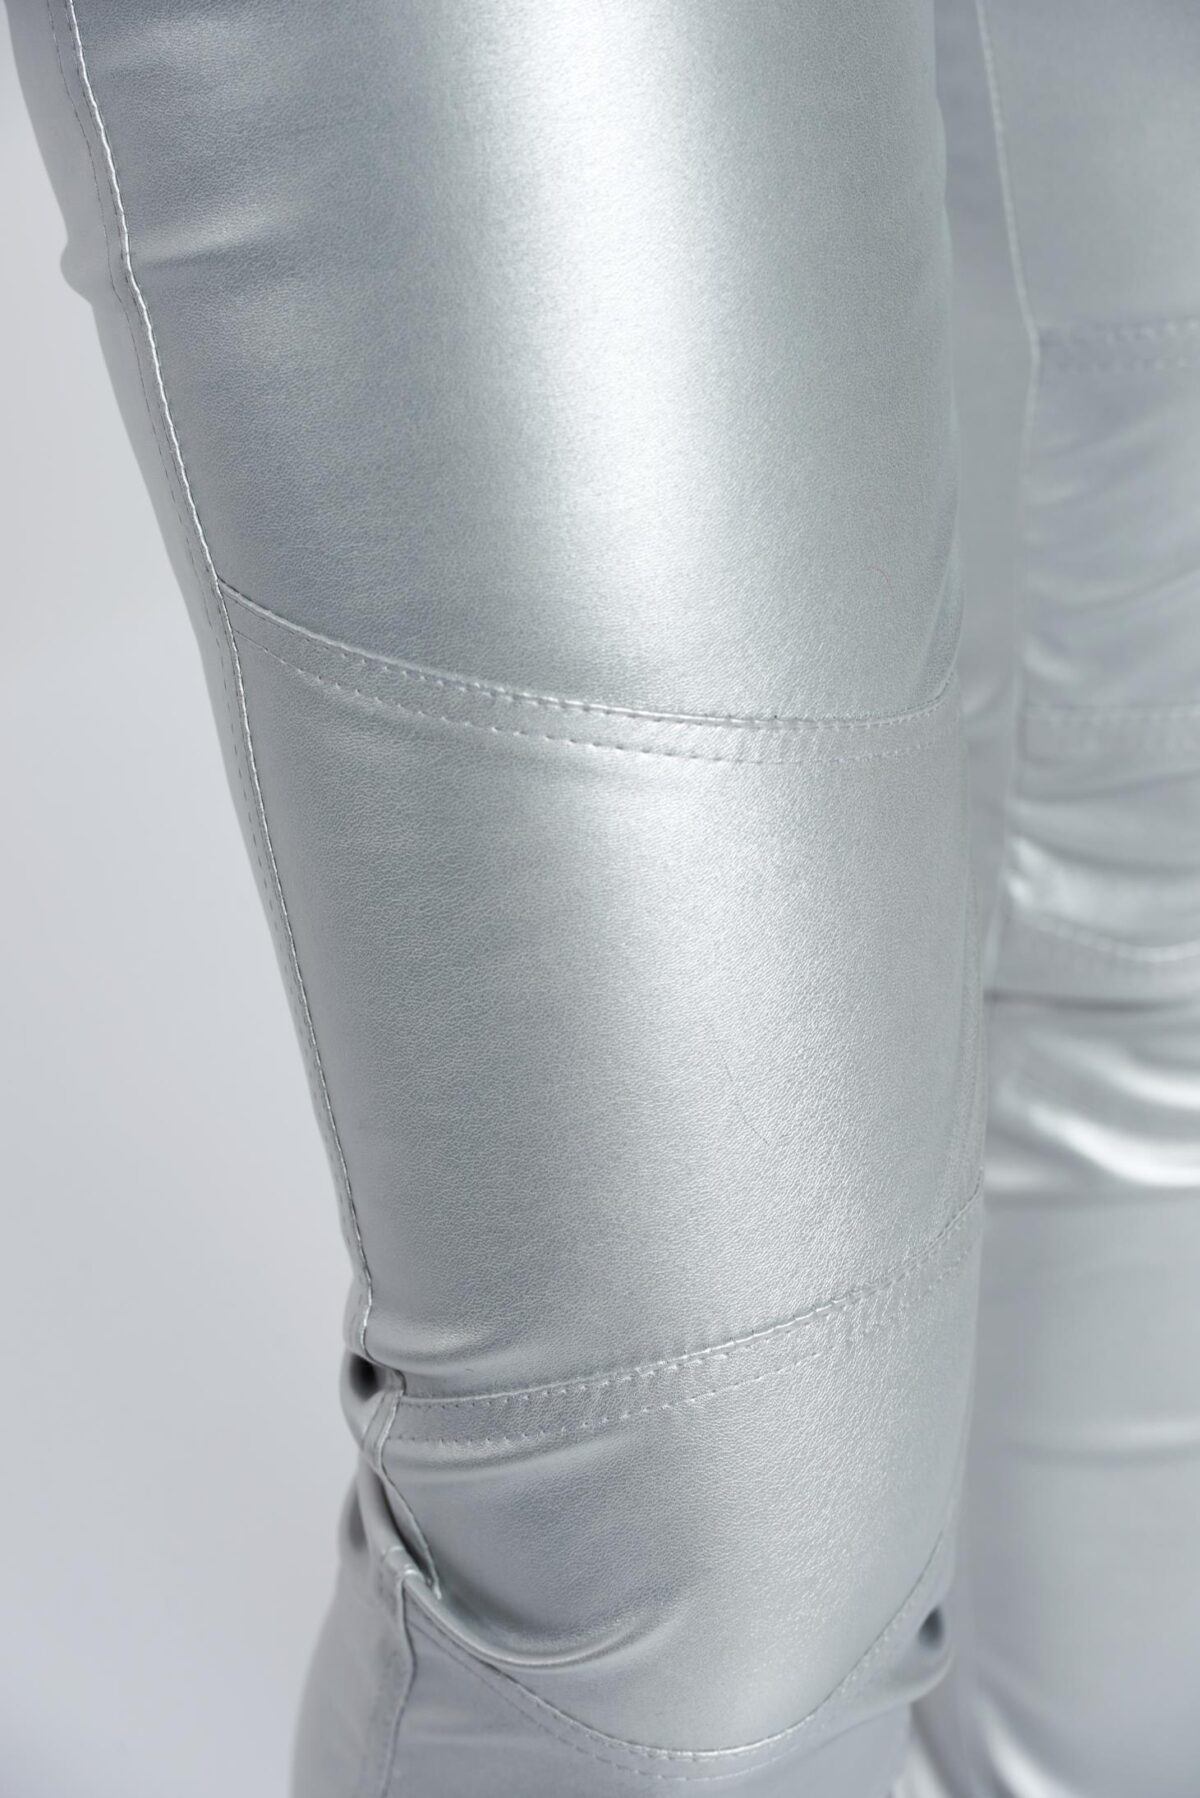 Silver Trousers Casual With Metallic Aspect And Medium Waist